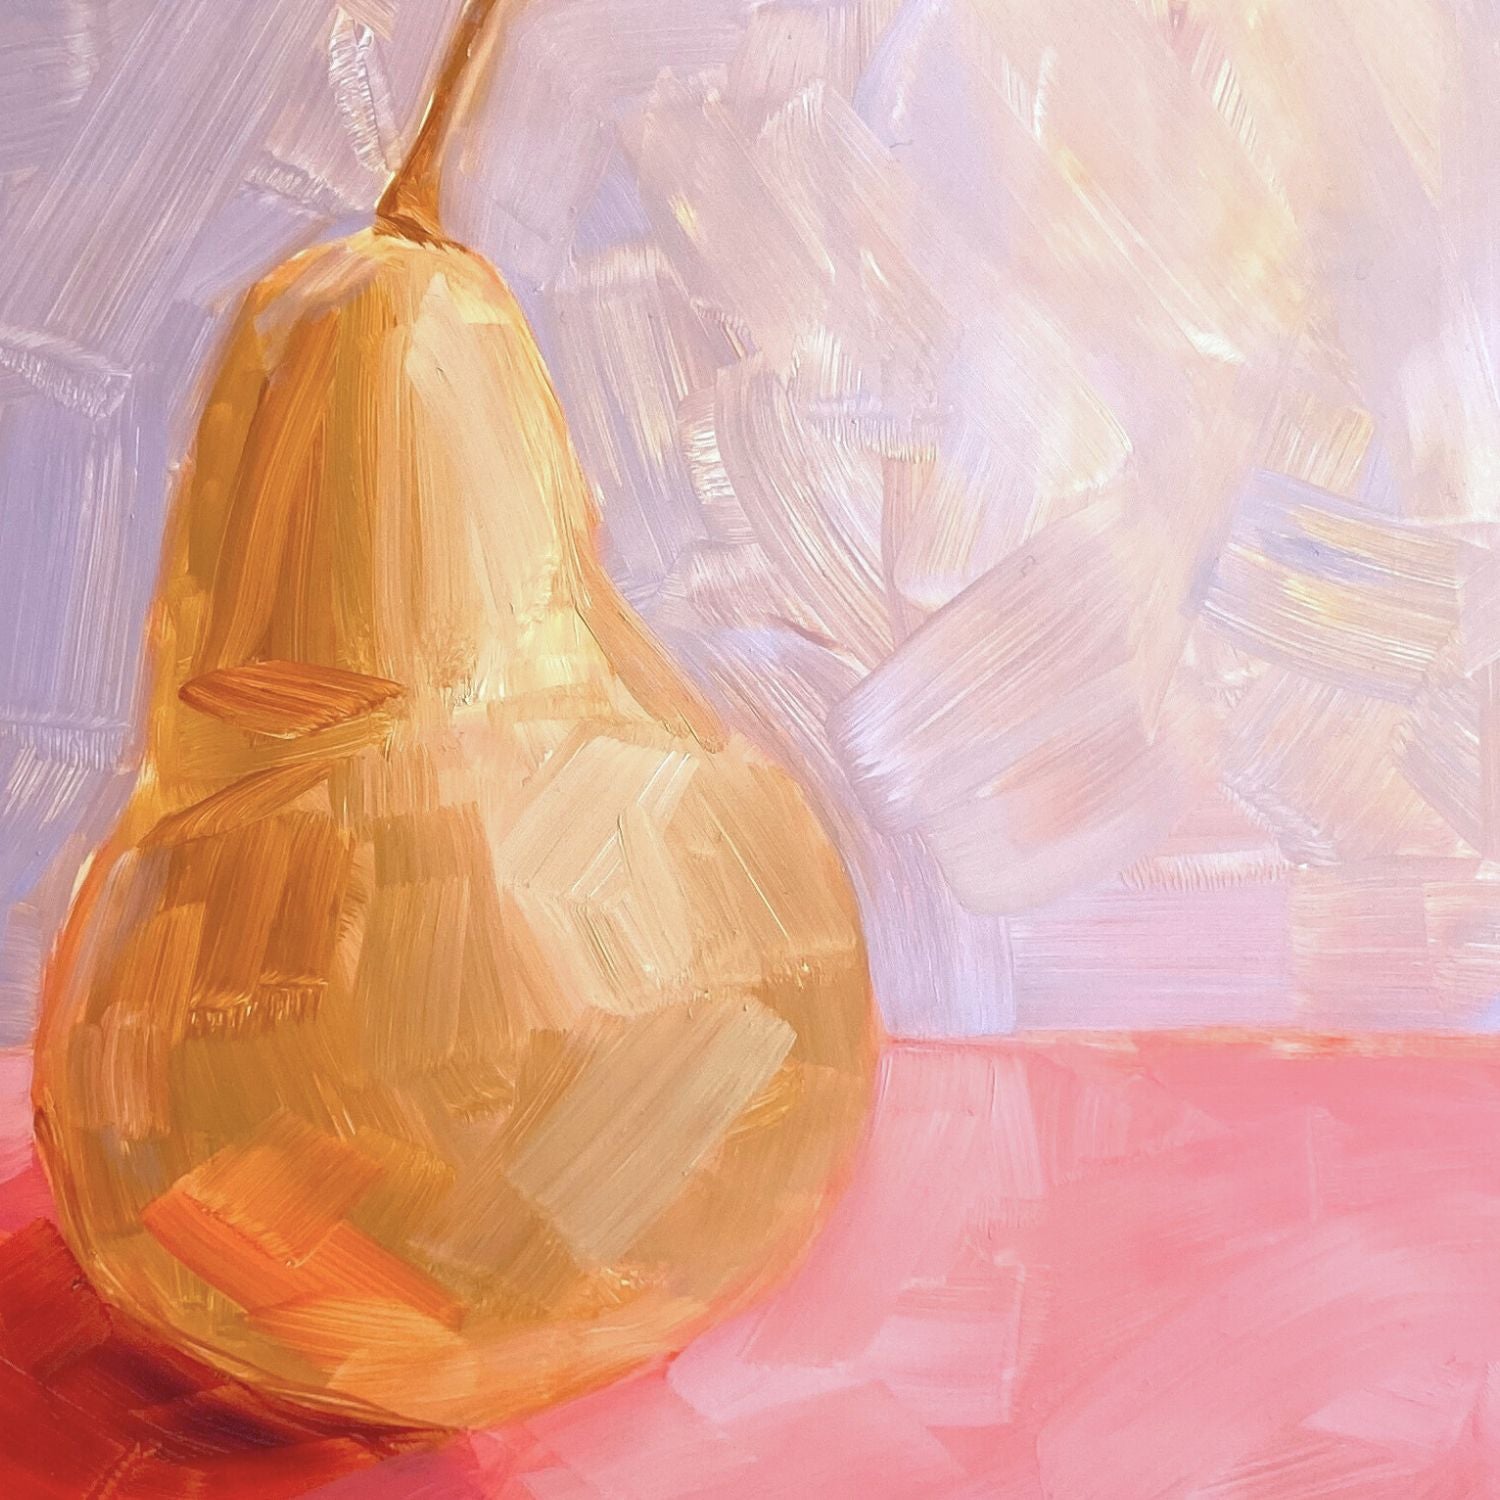 close up of an original oil painting of a yellow / beige pear on a textured pink surface and lilac background